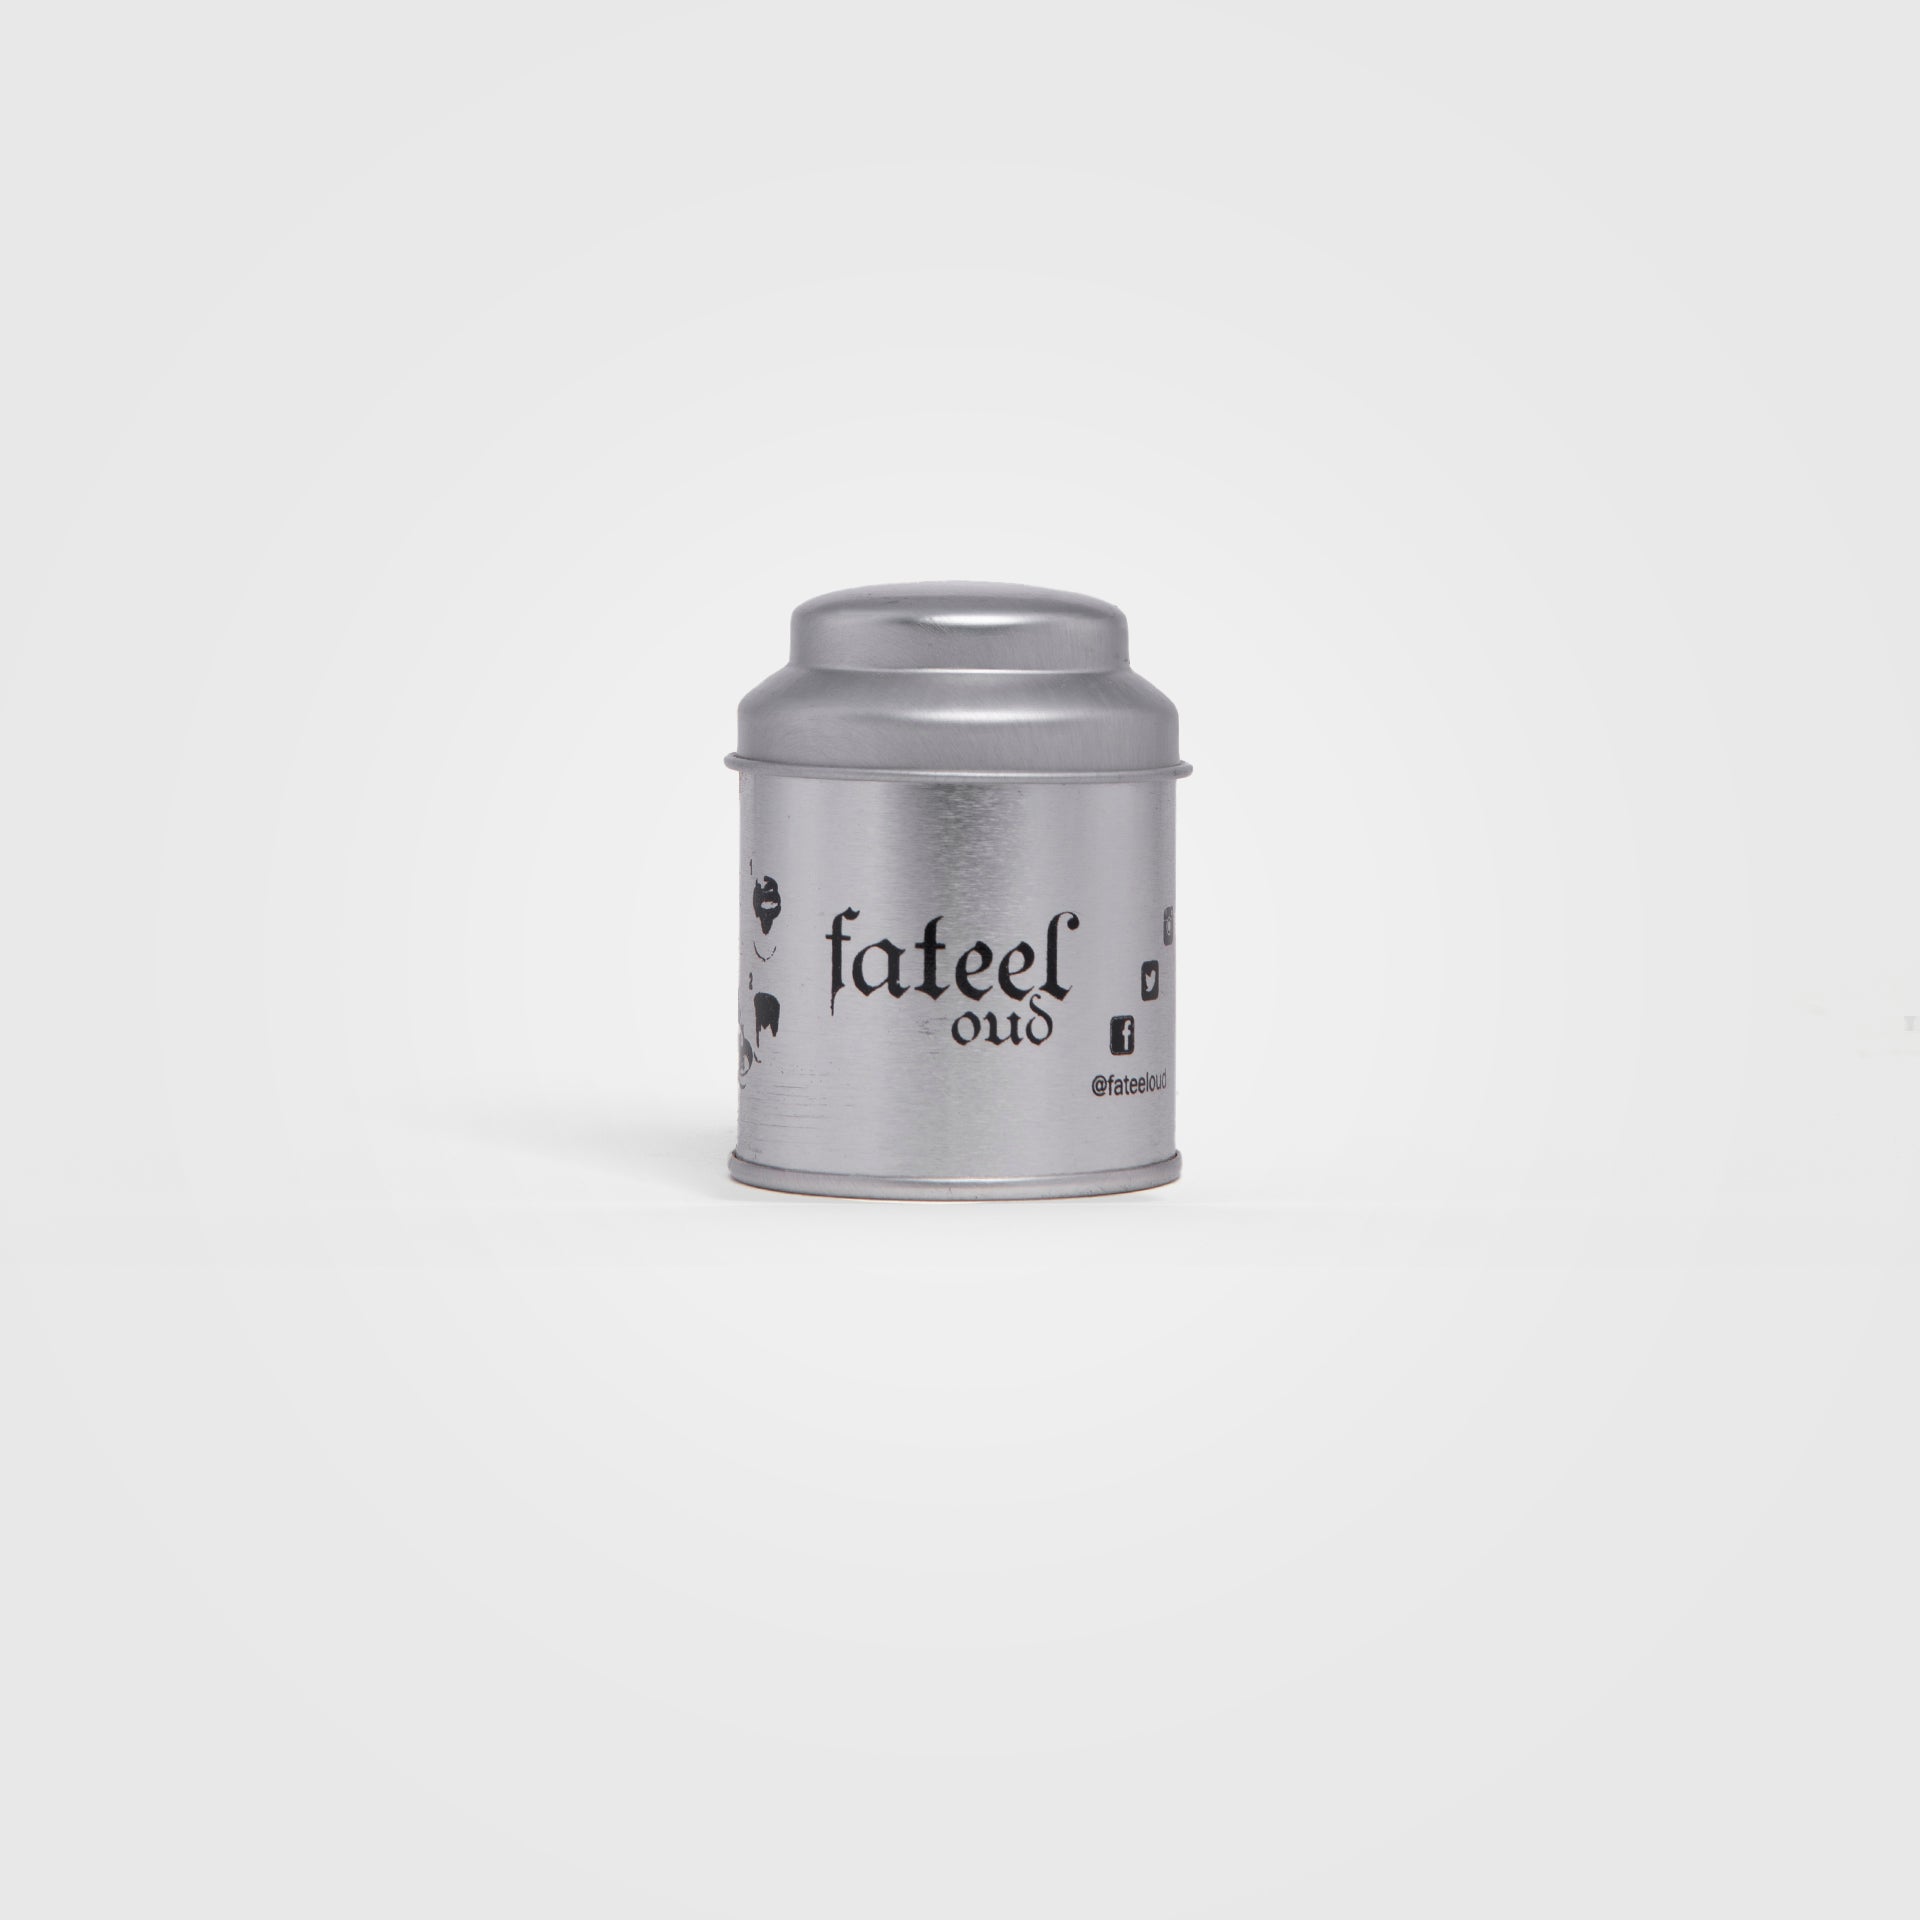 Oud Incense Can From Fateel Oud